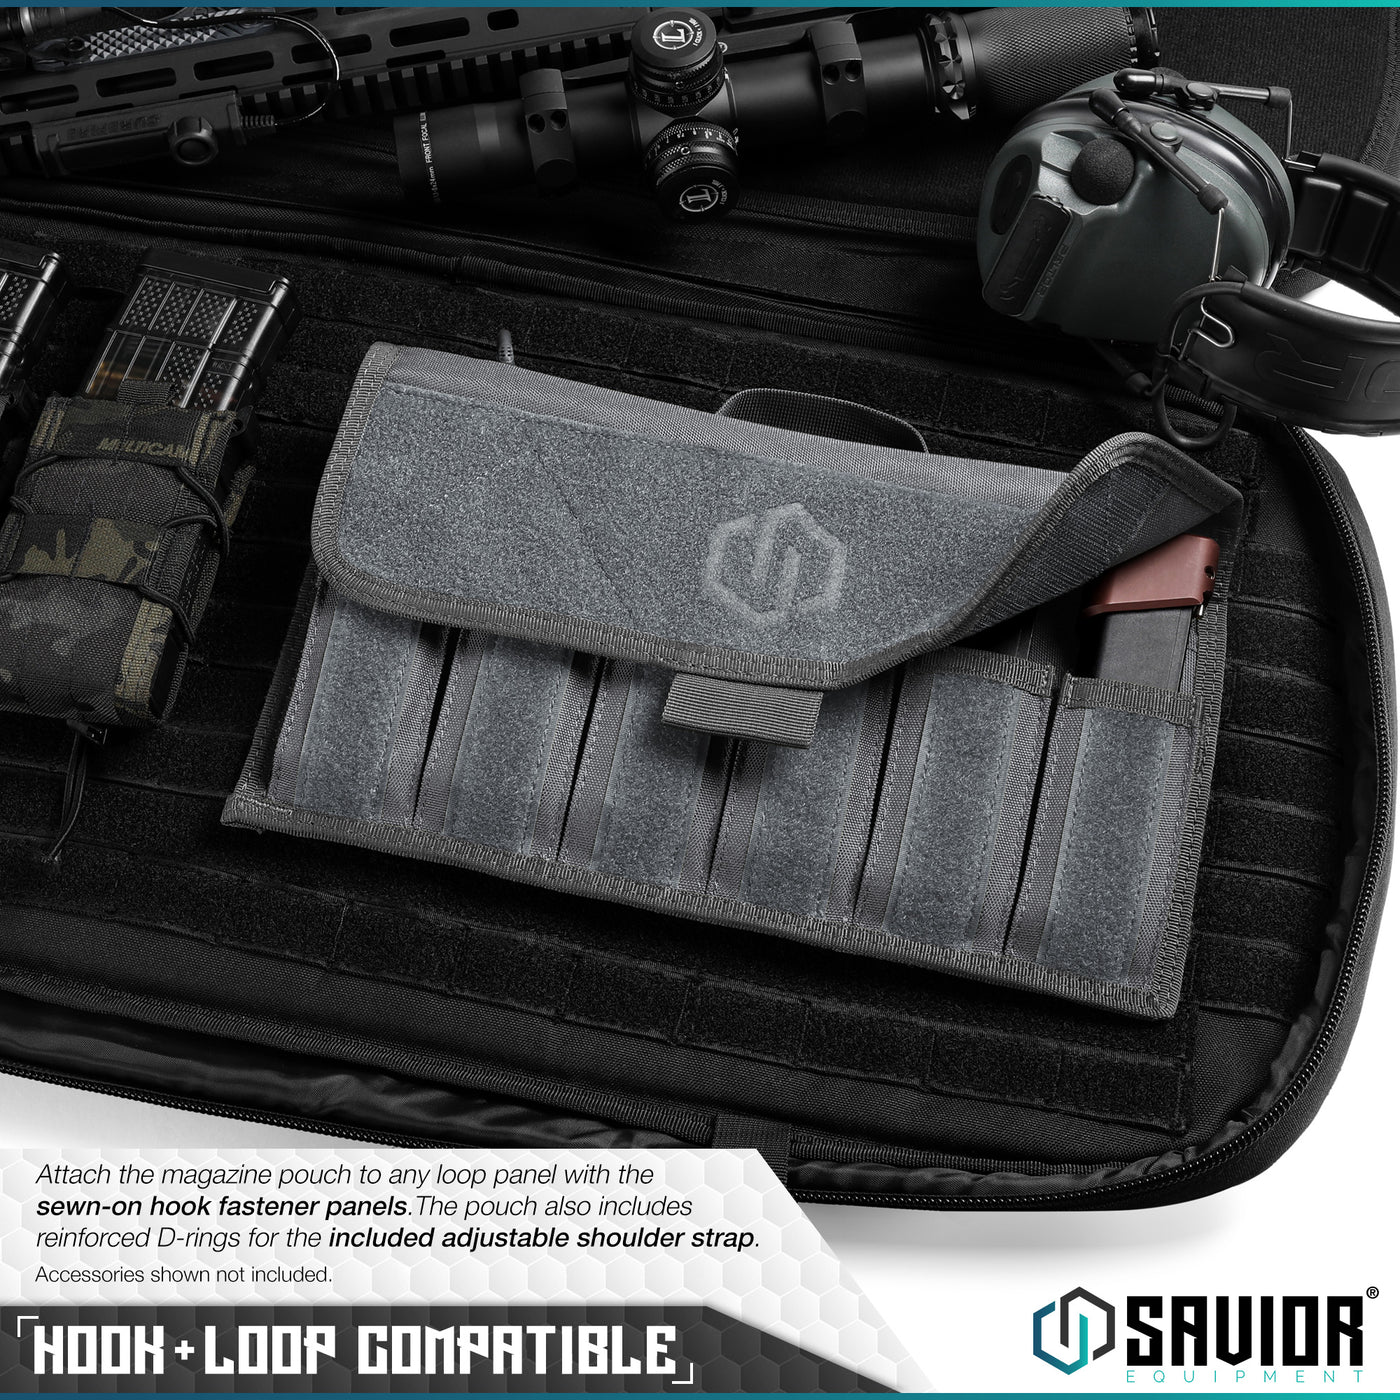 Hook-N-Loop Compatible - Attach the magazine pouch to any loop panel with the sewn-on hook fastener panel. The pouch can also be easily attached to a belt with the built-in belt loop. Accessories shown not included.